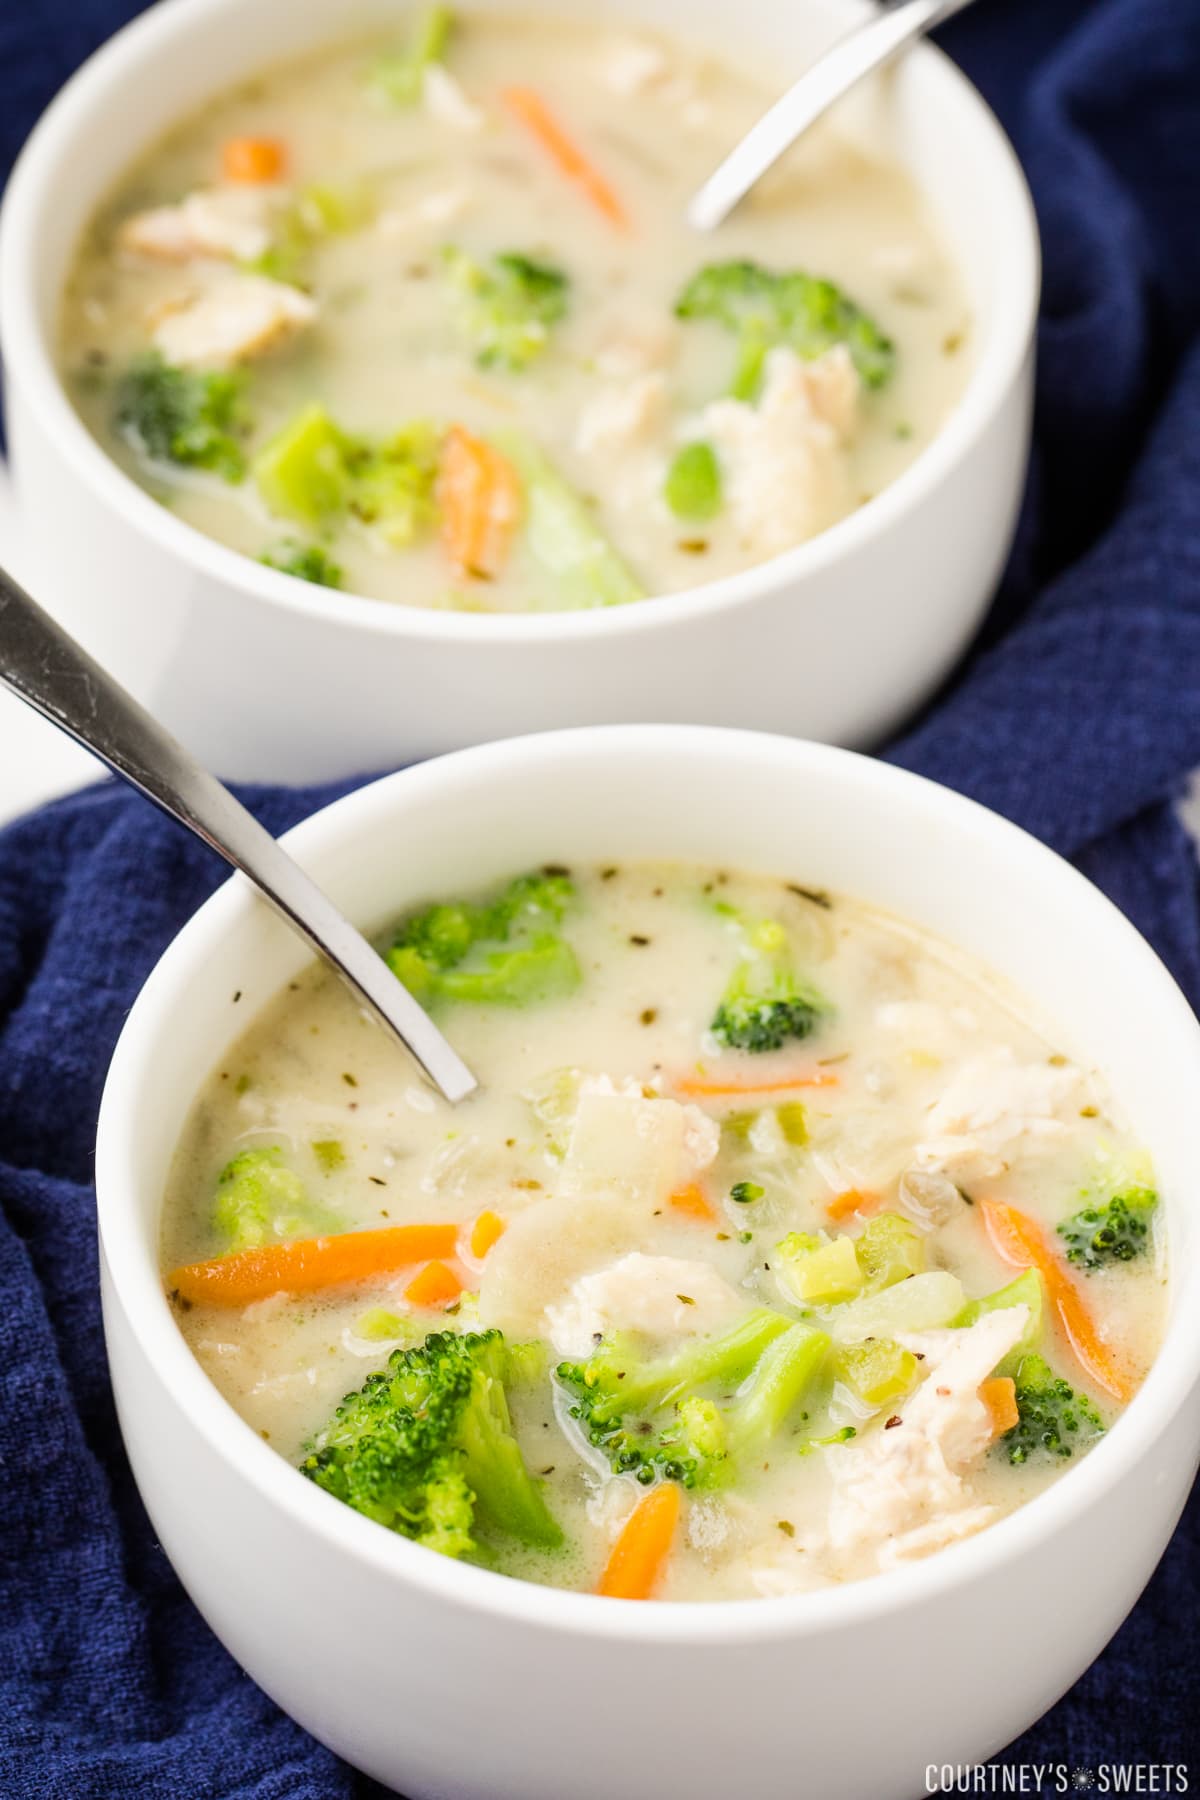 two small bowls of chicken broccoli soup with a spoon on a navy blue cloth napkin.